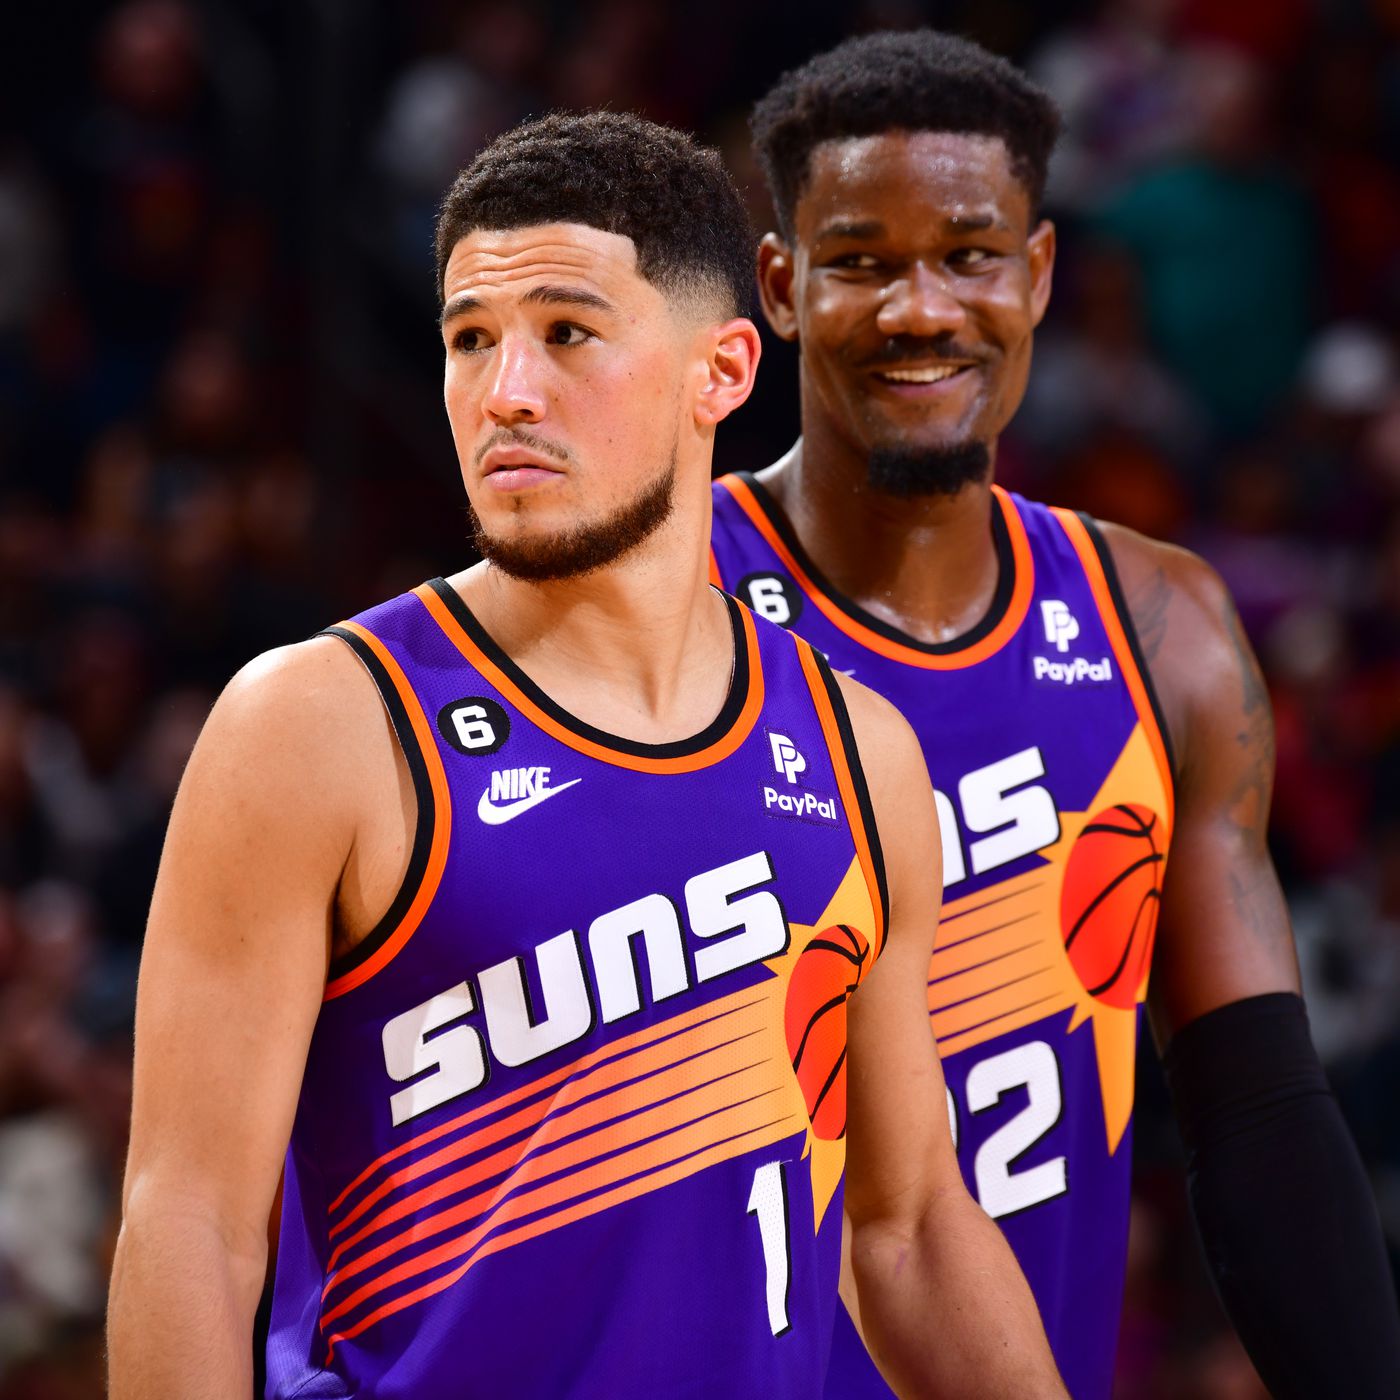 Rapid Recap: Devin Booker drops efficient 51 point in three quarters,  Deandre Ayton adds 30, Suns blowout Bulls 132-115 - Bright Side Of The Sun